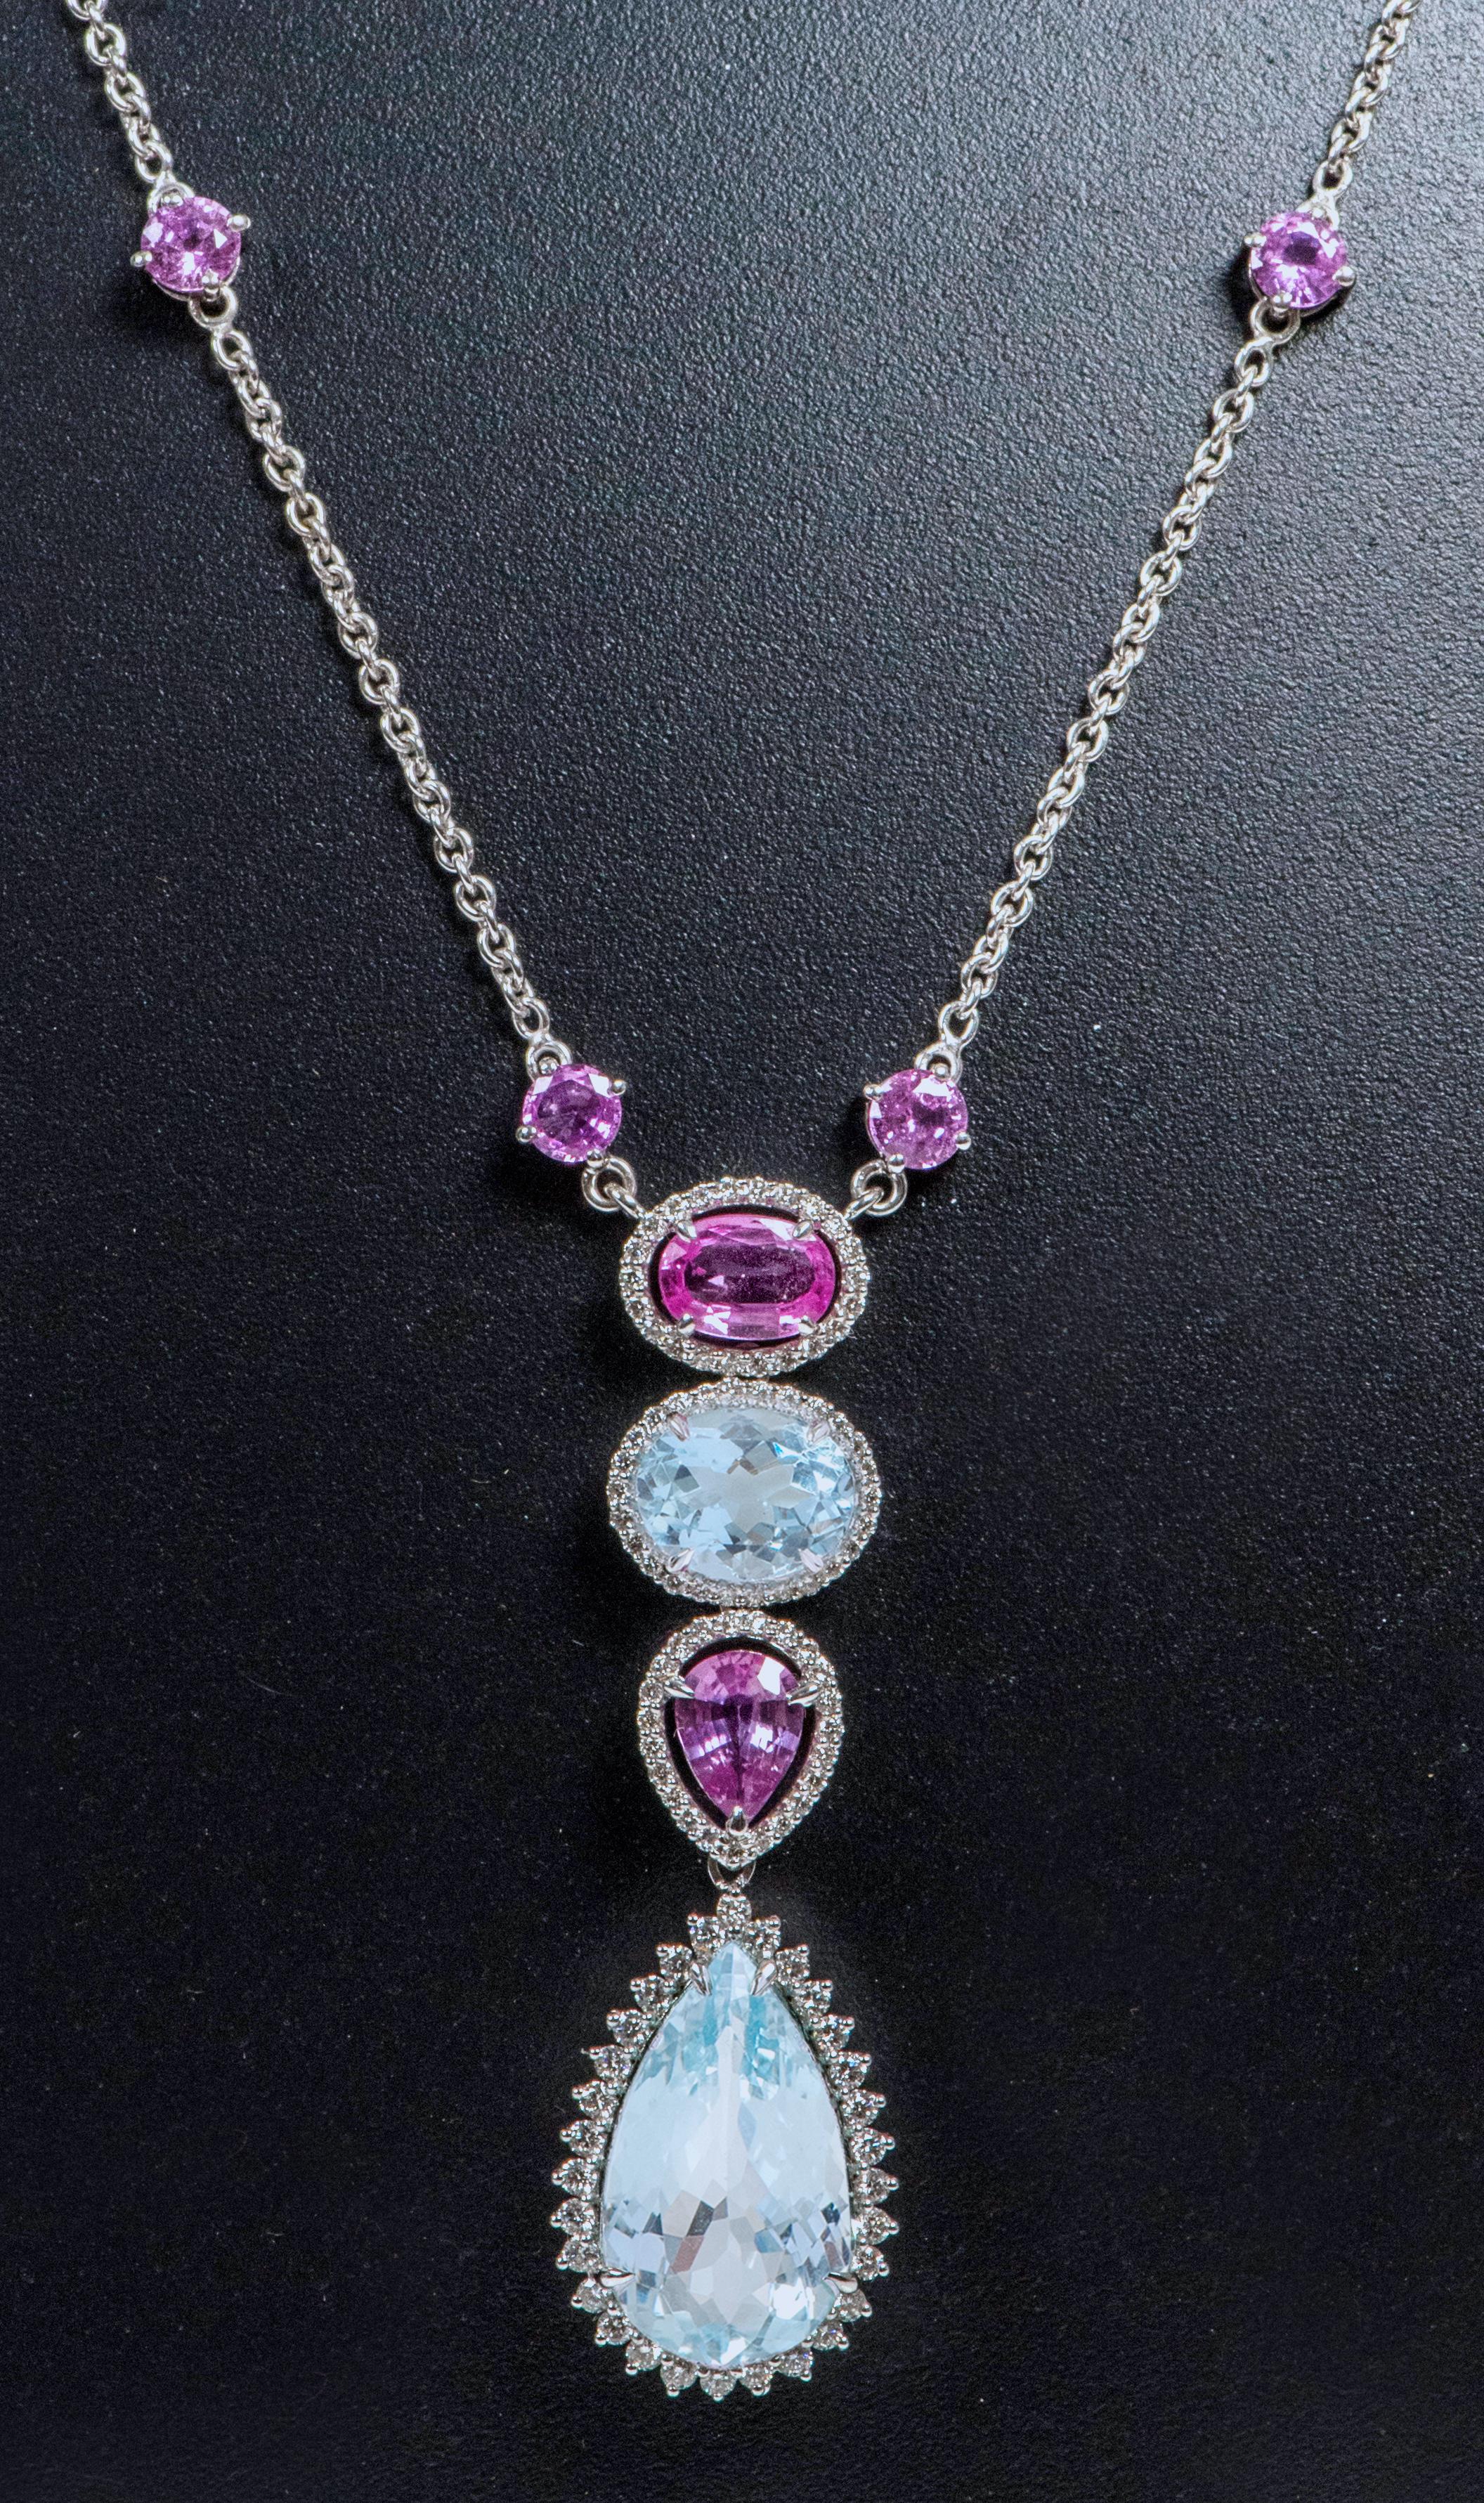 18 Karat White Gold 12.81 Carats Aquamarine, Pink Sapphire, and Diamond Pendant Drop Necklace 

This exemplary contemporary vibrant pink sapphire, santa marina aquamarine, and diamond cluster drop necklace is mesmerizing. The necklace is designed